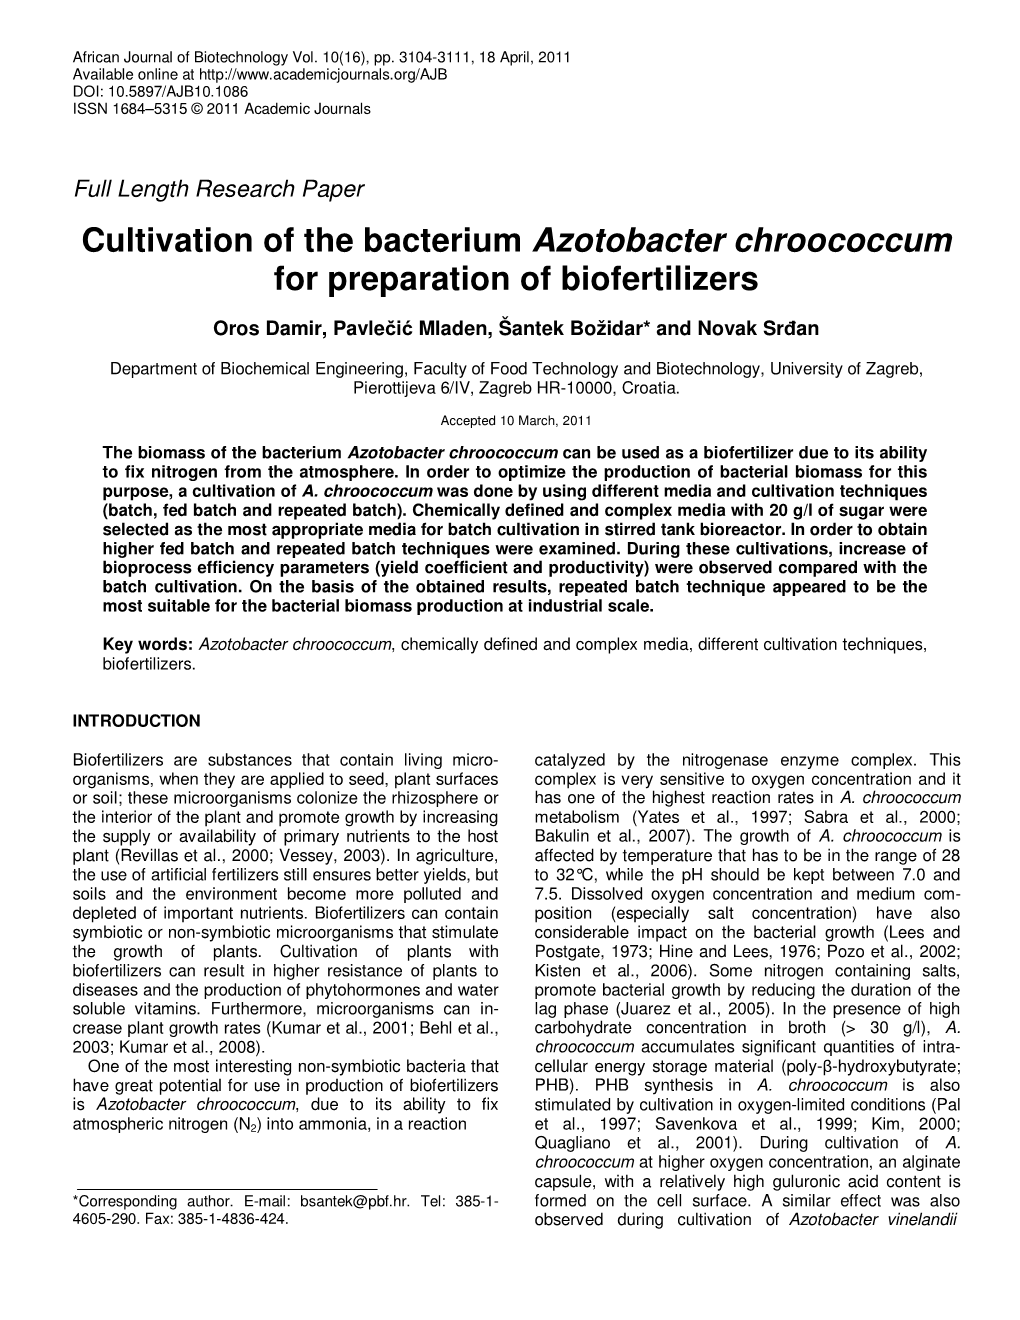 Cultivation of the Bacterium Azotobacter Chroococcum for Preparation of Biofertilizers